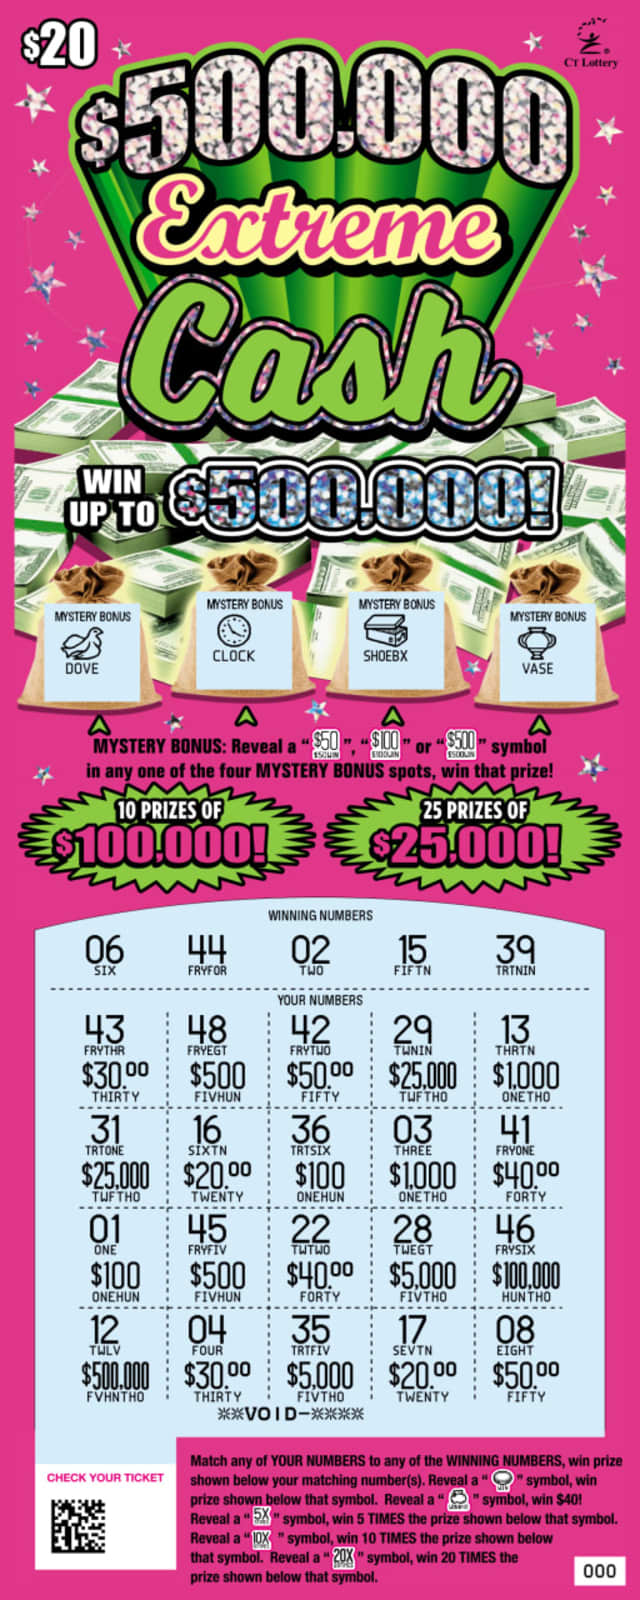 A Fairfield woman won $500,000 playing Lottery.